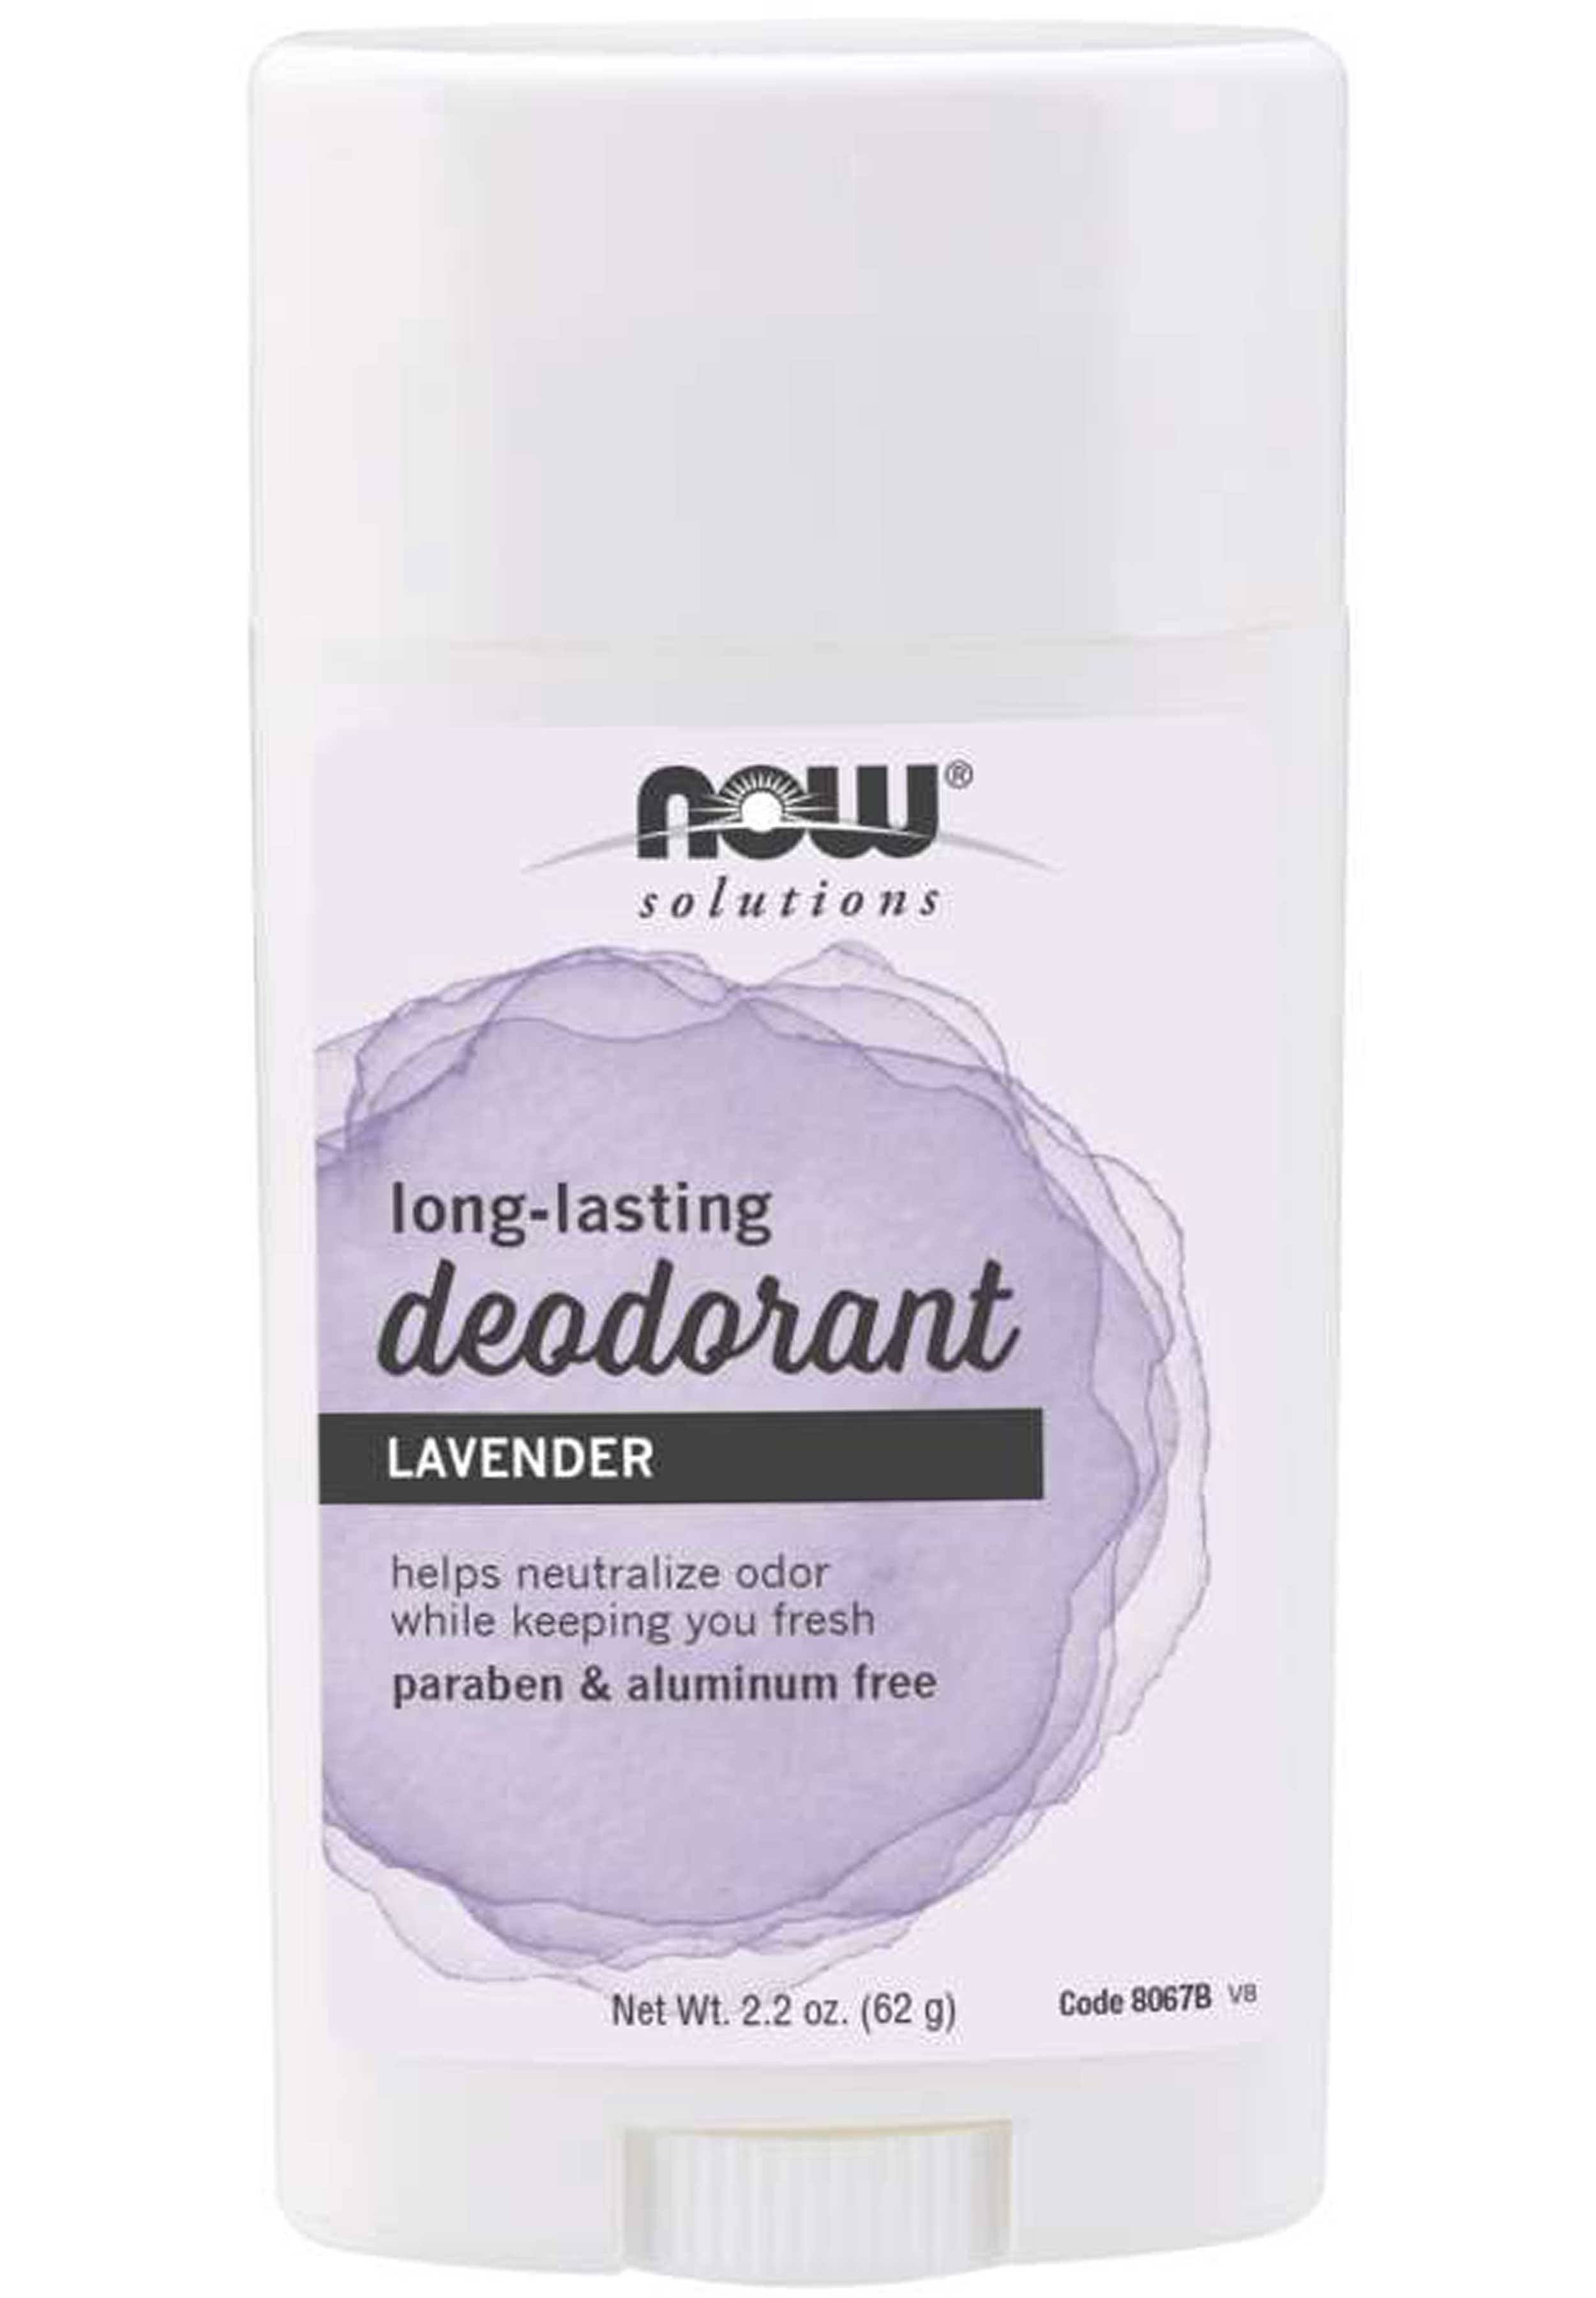 Now Foods Solutions Long Lasting Deodorant Stick - Refreshing Lavender, 2.2oz